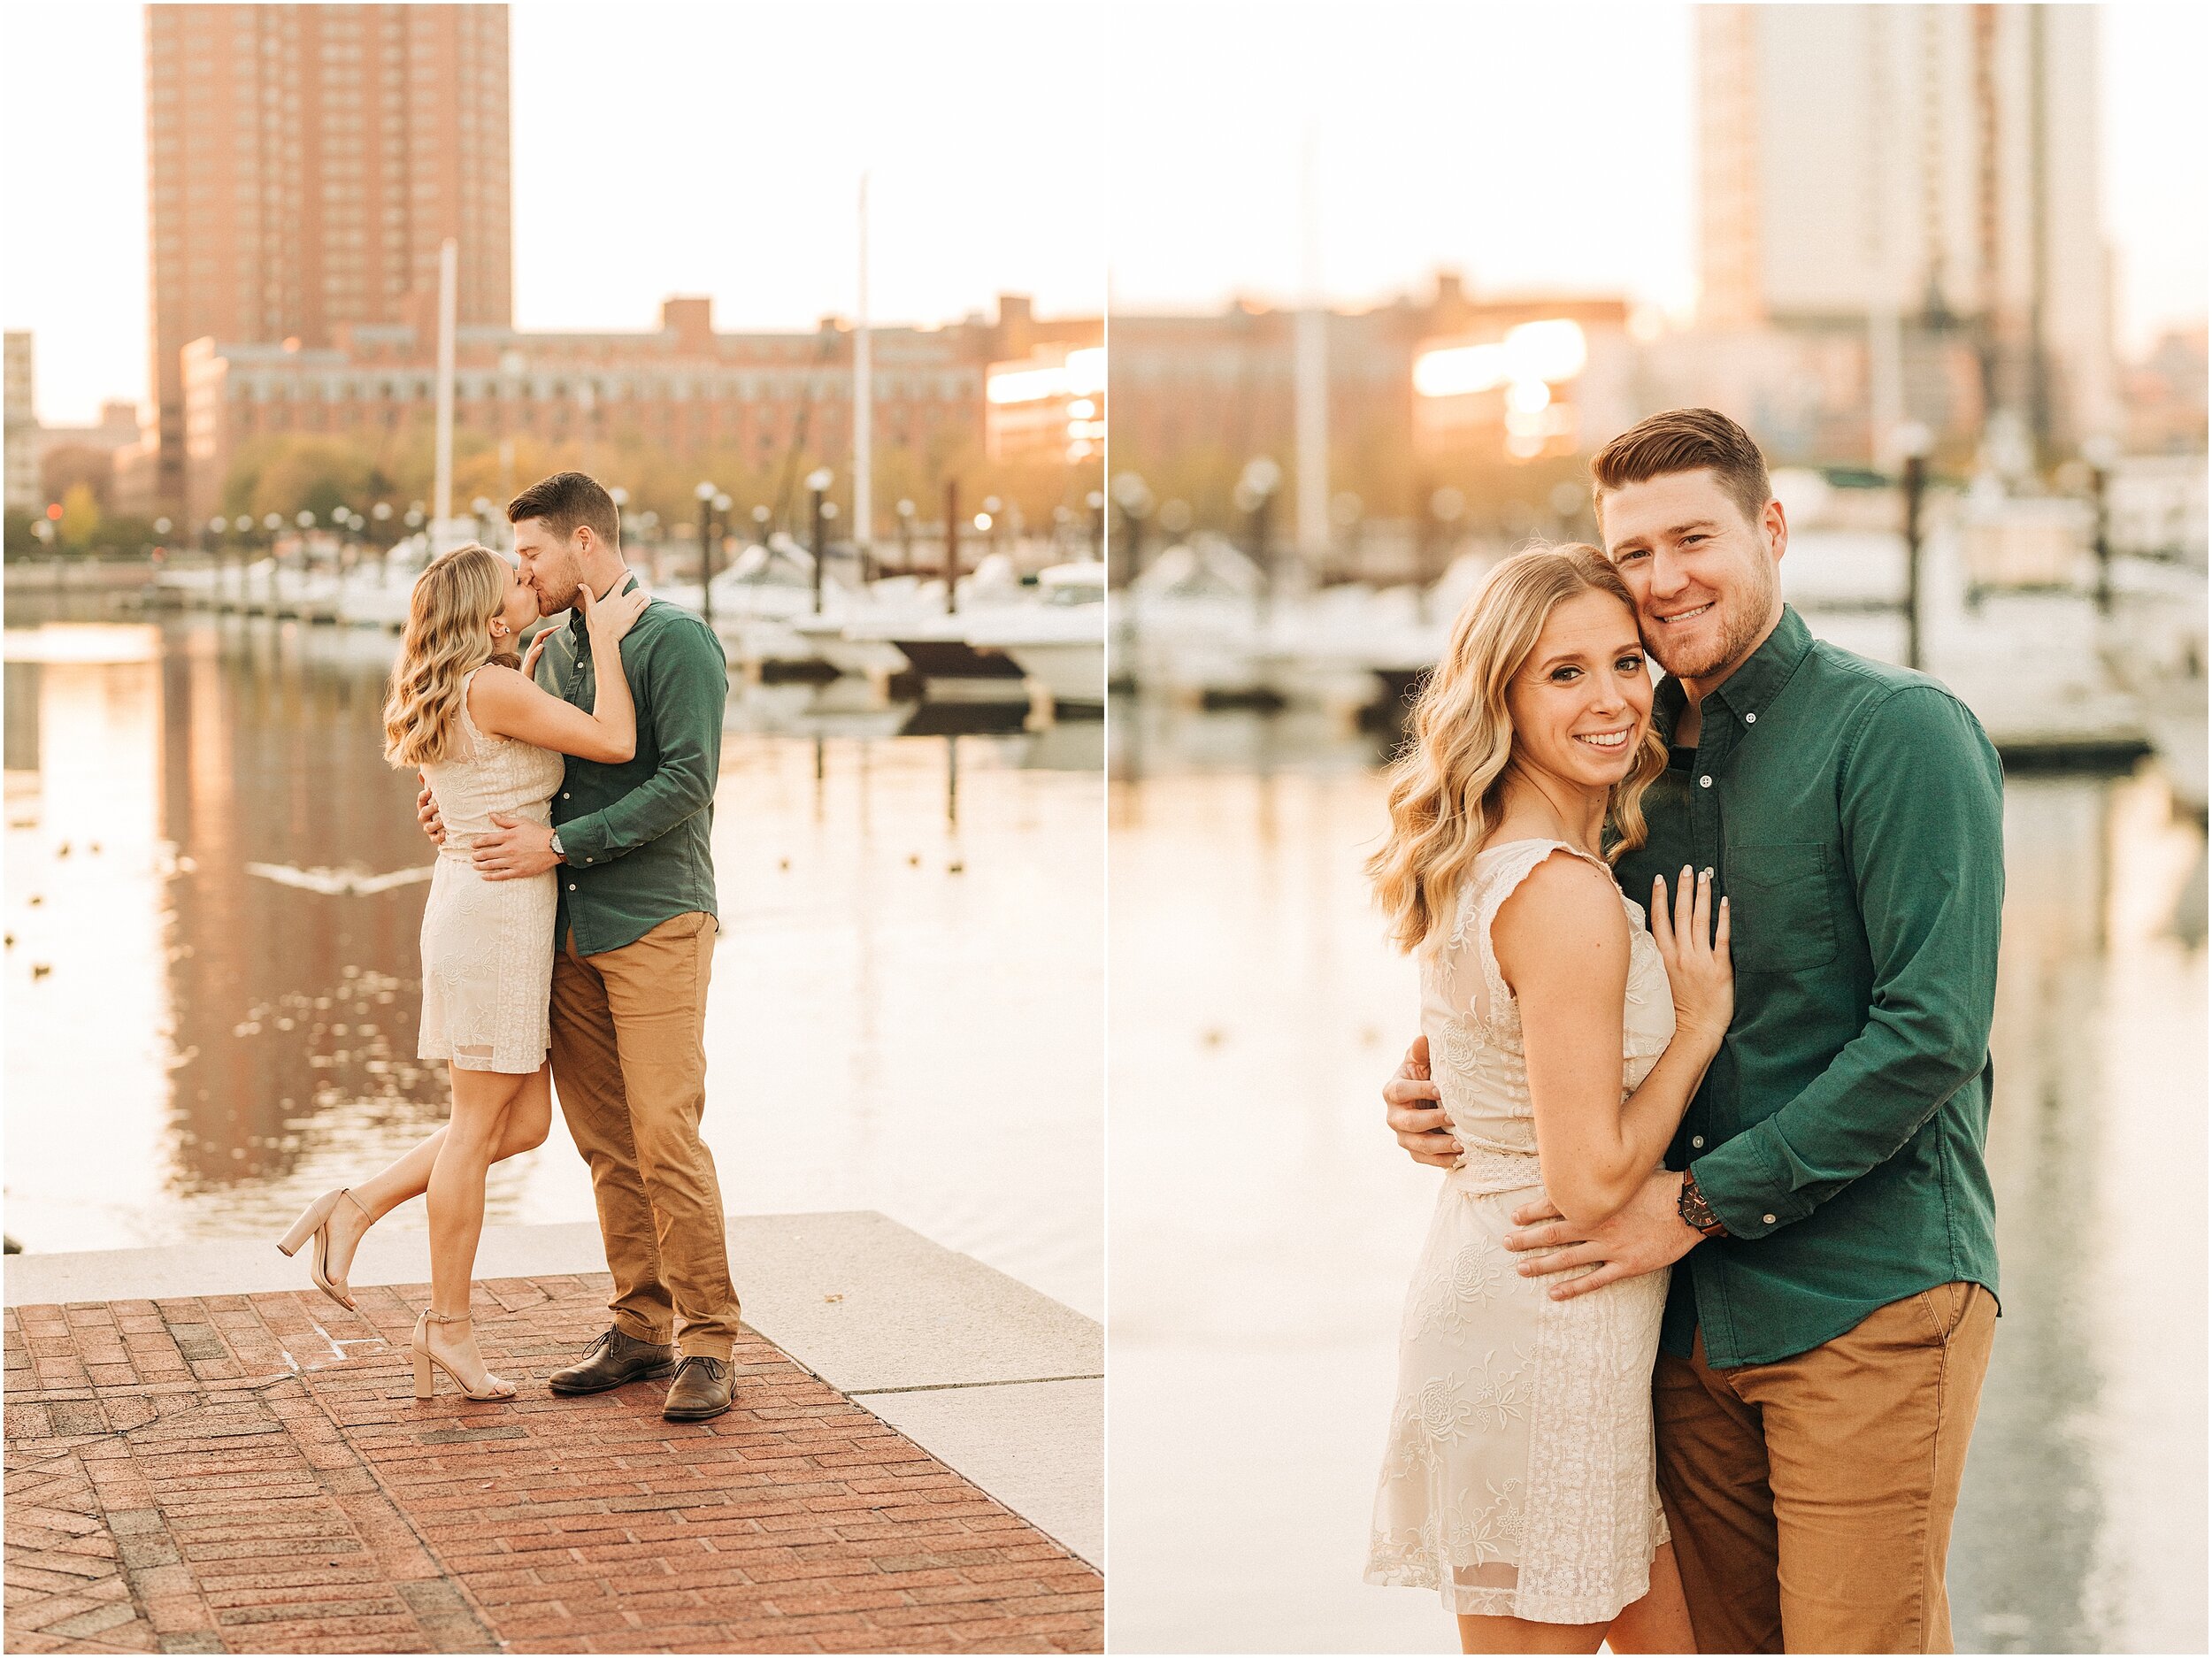 hannah leigh photography Baltimore City Maryland October Engagement Session_7064.jpg